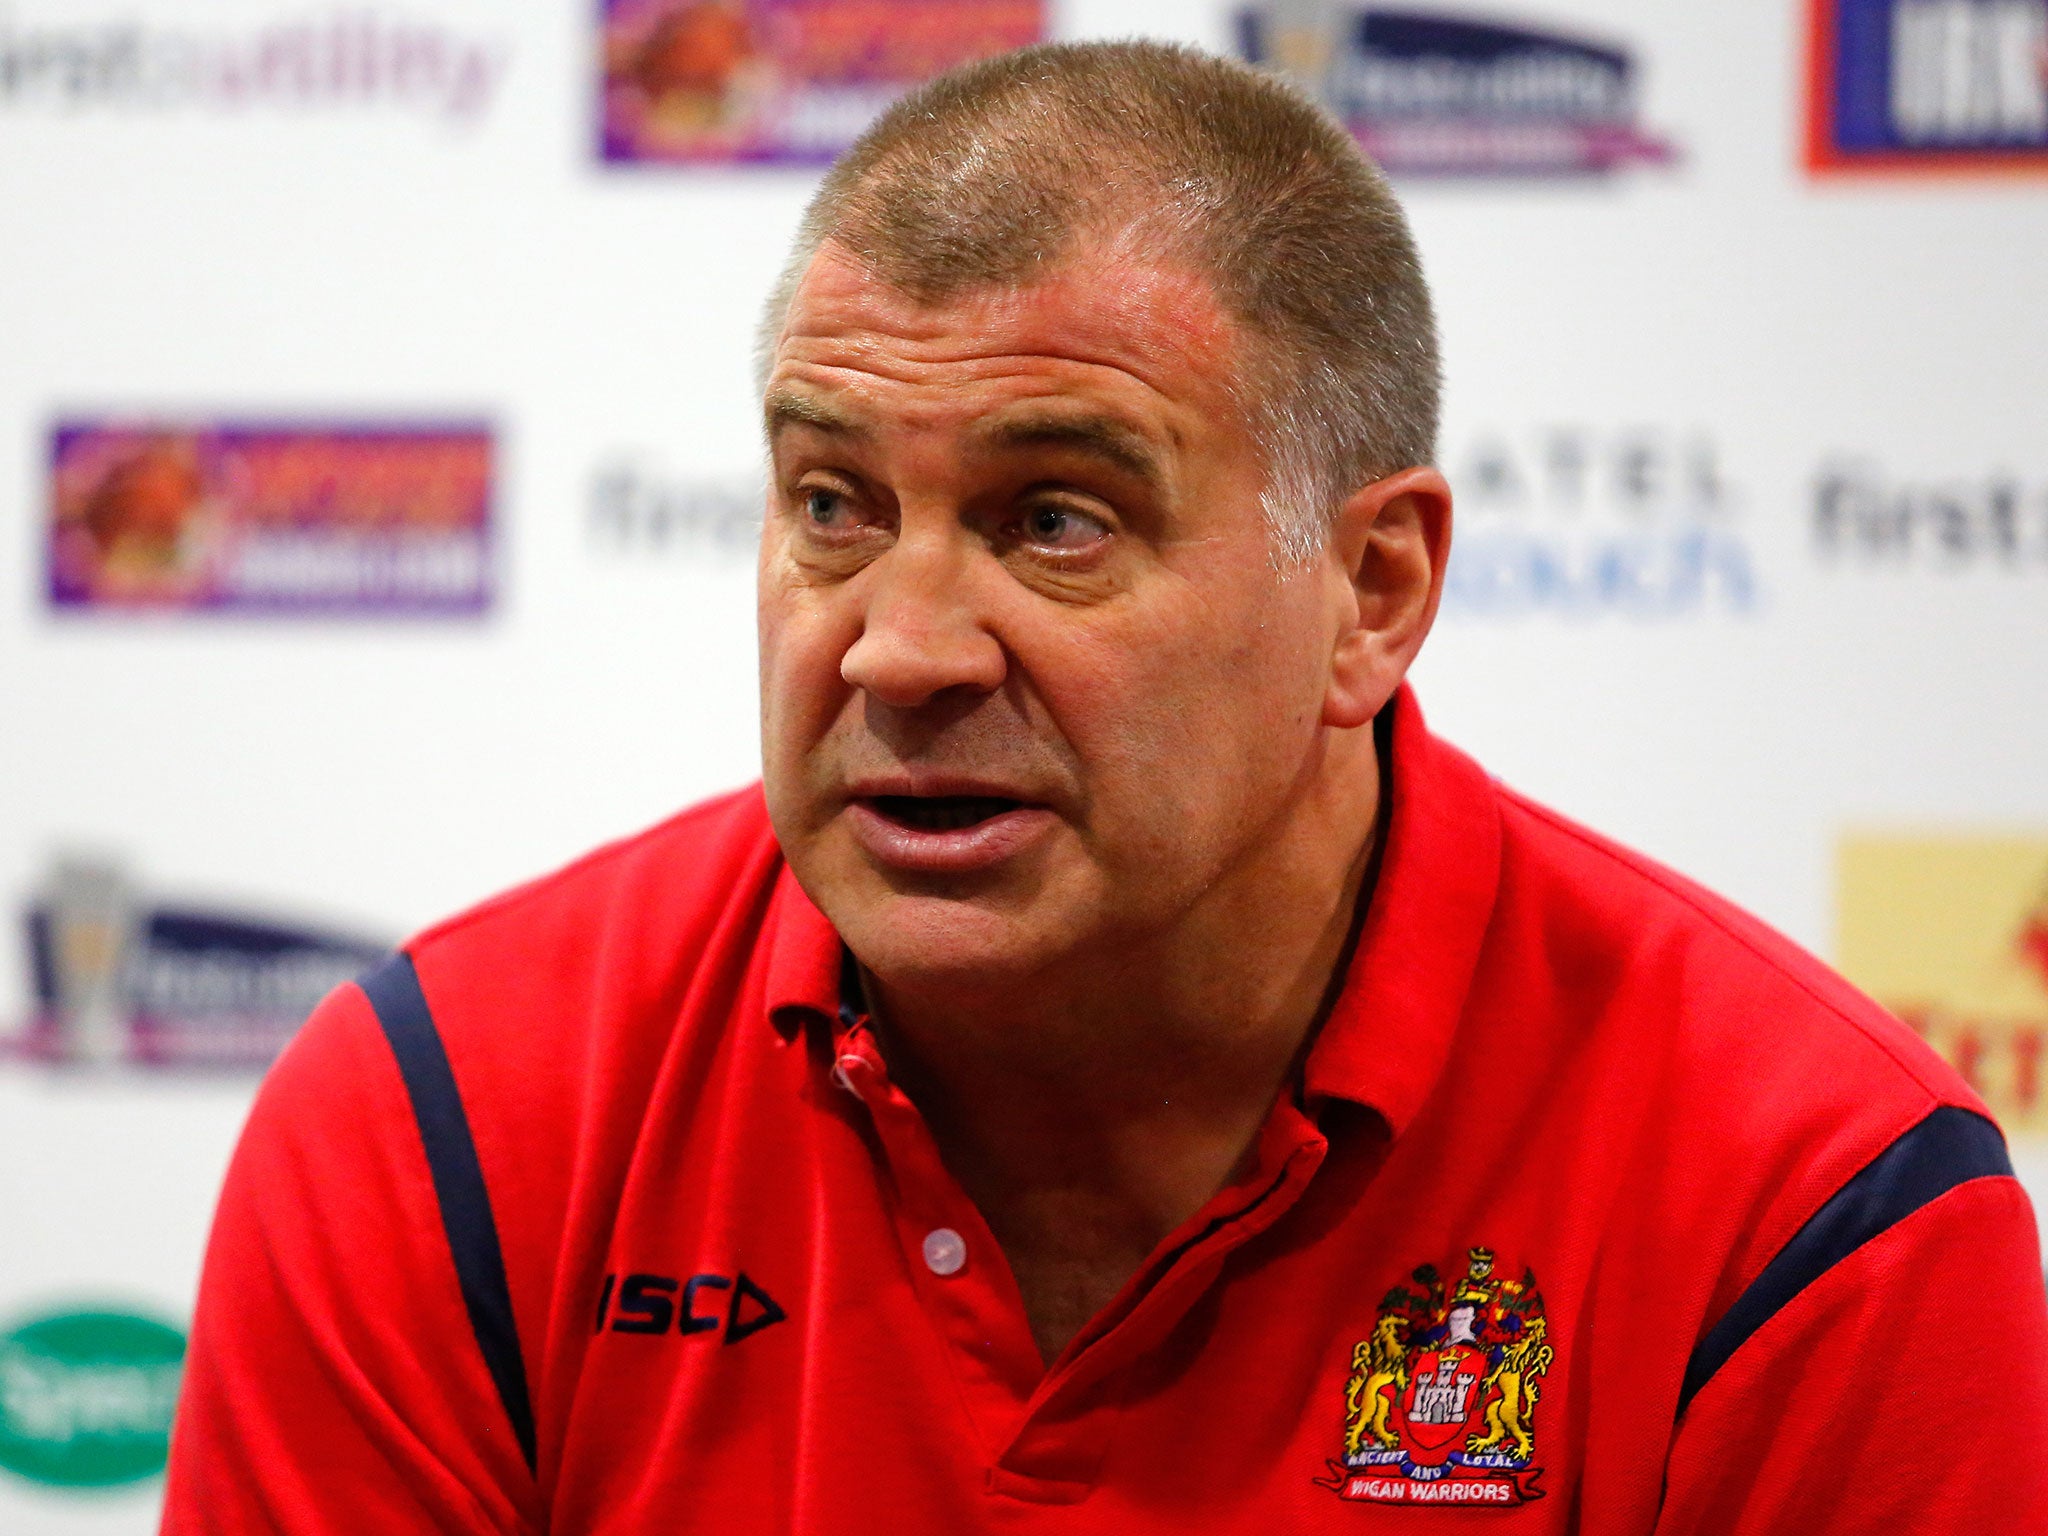 Wane will end his tenure at the end of the season